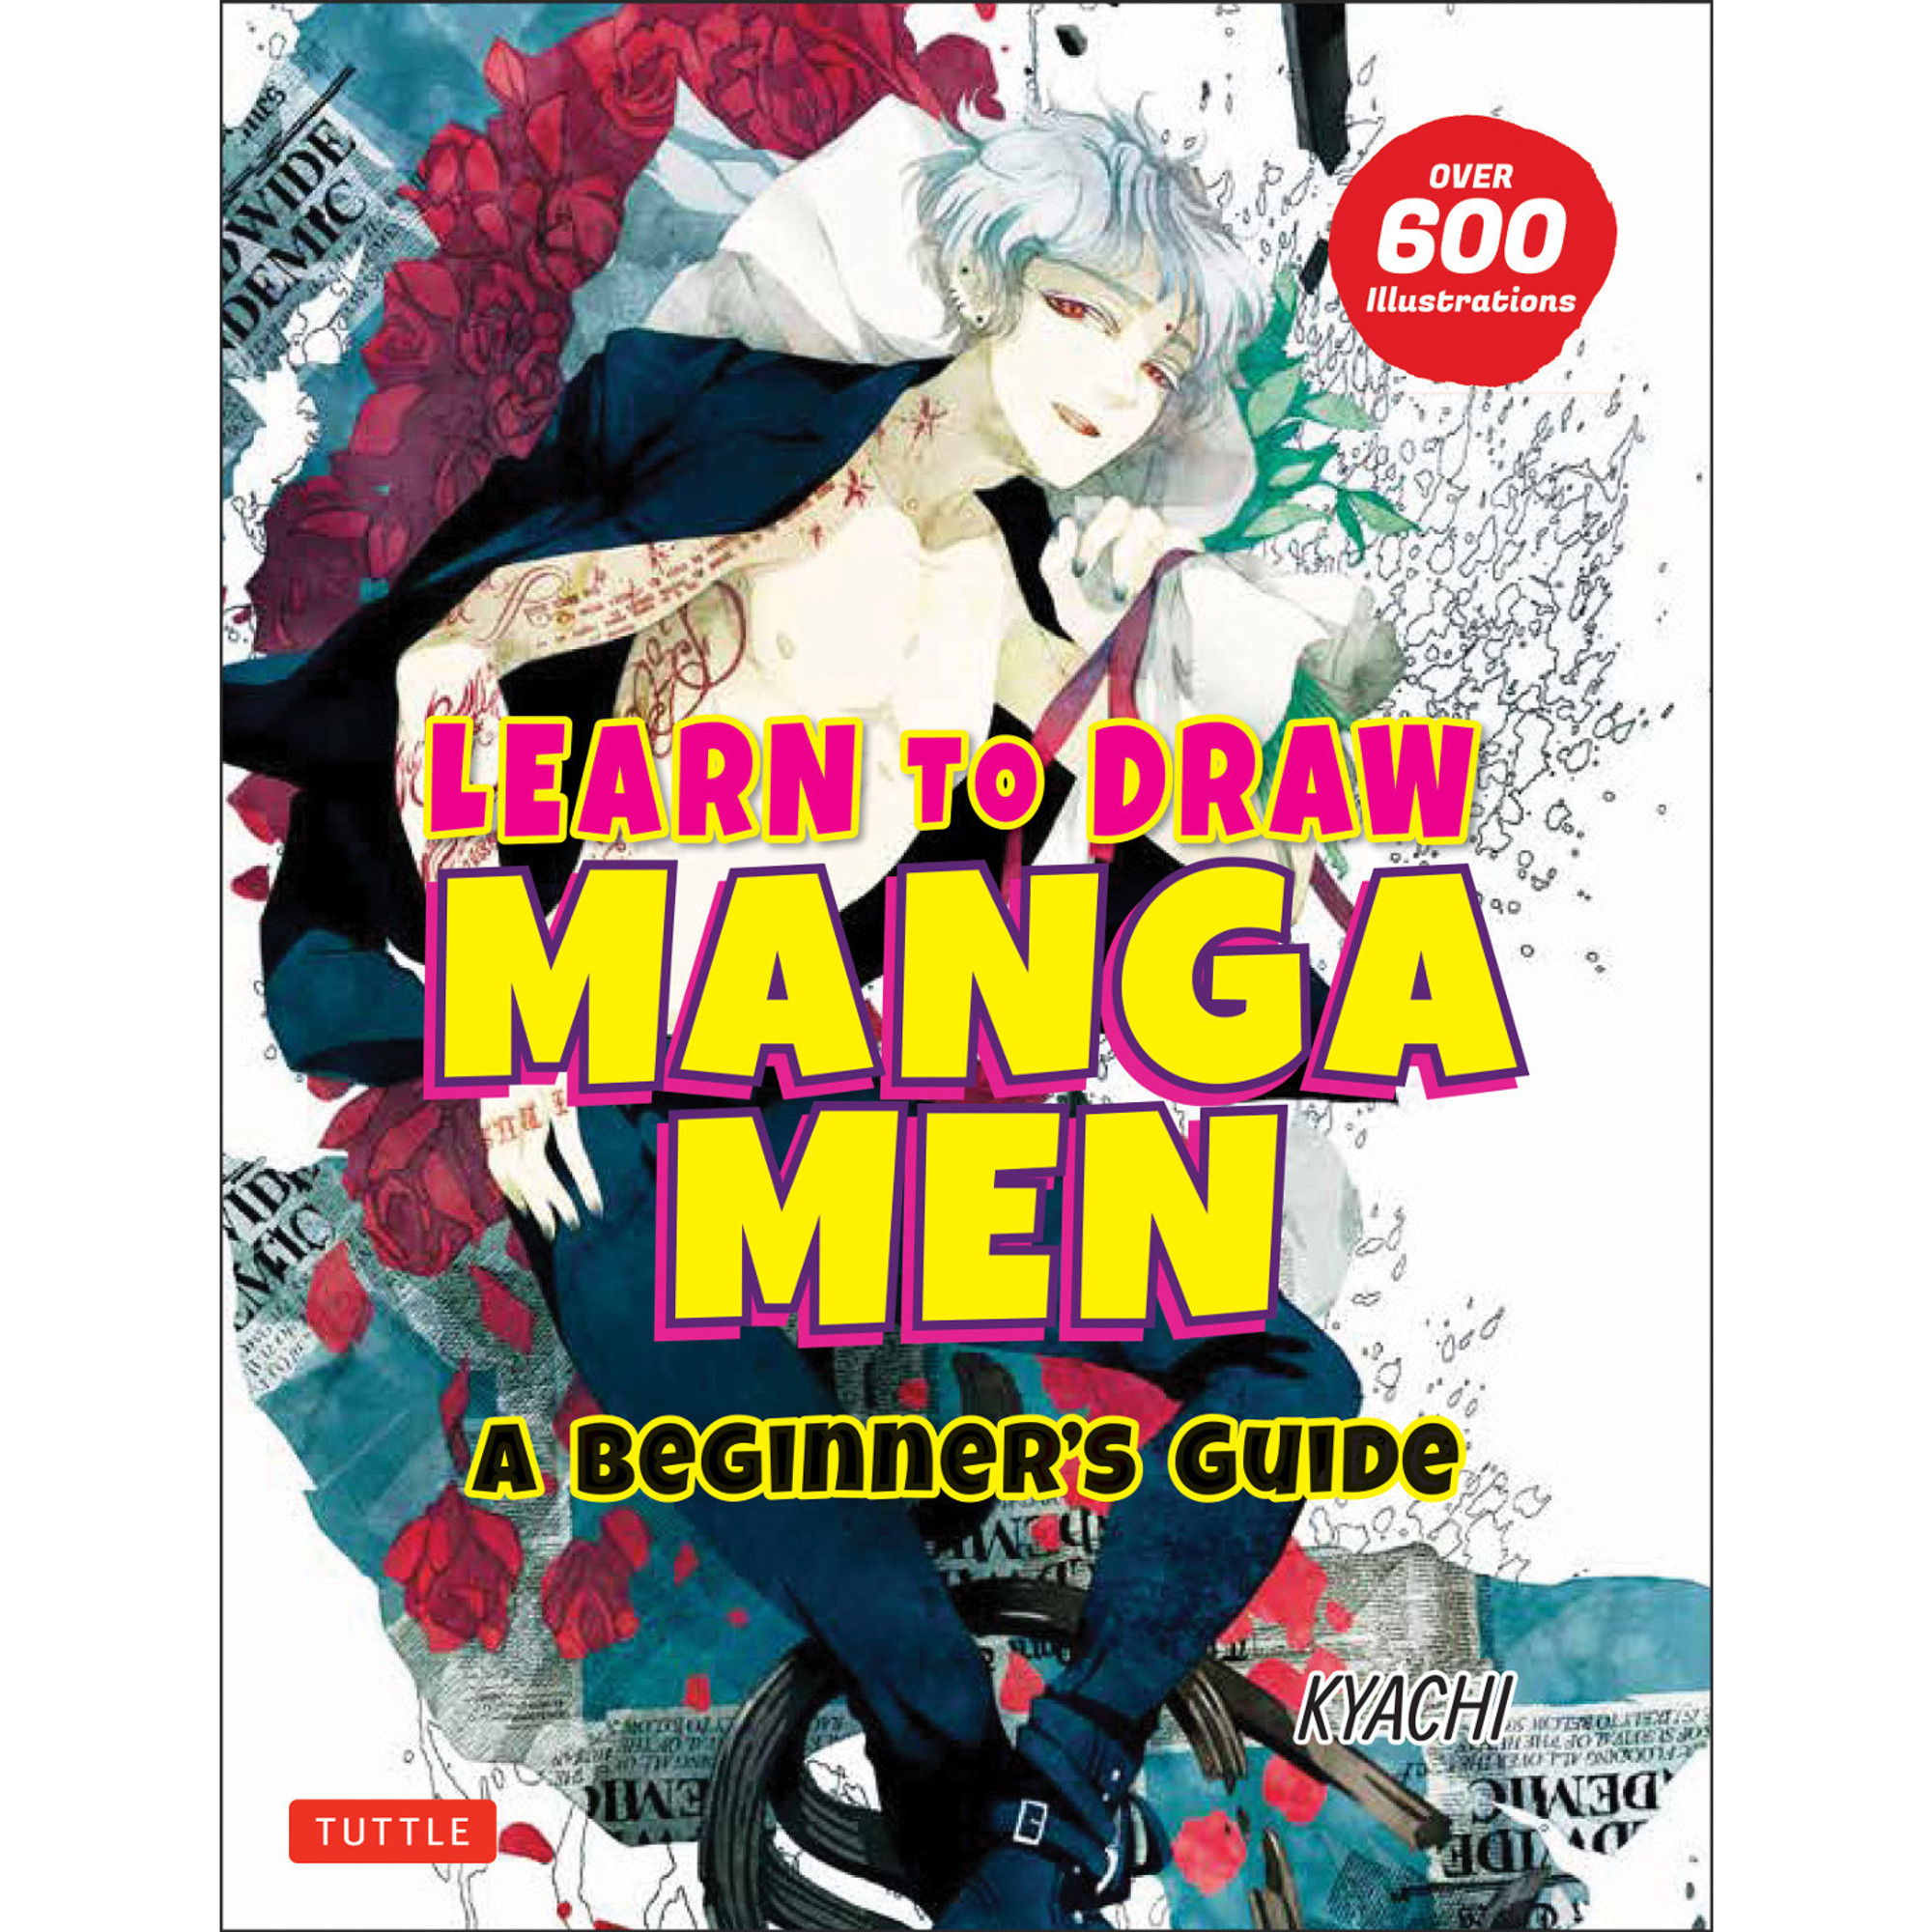 Beginner's Guide to Learn Anime and Manga Drawing